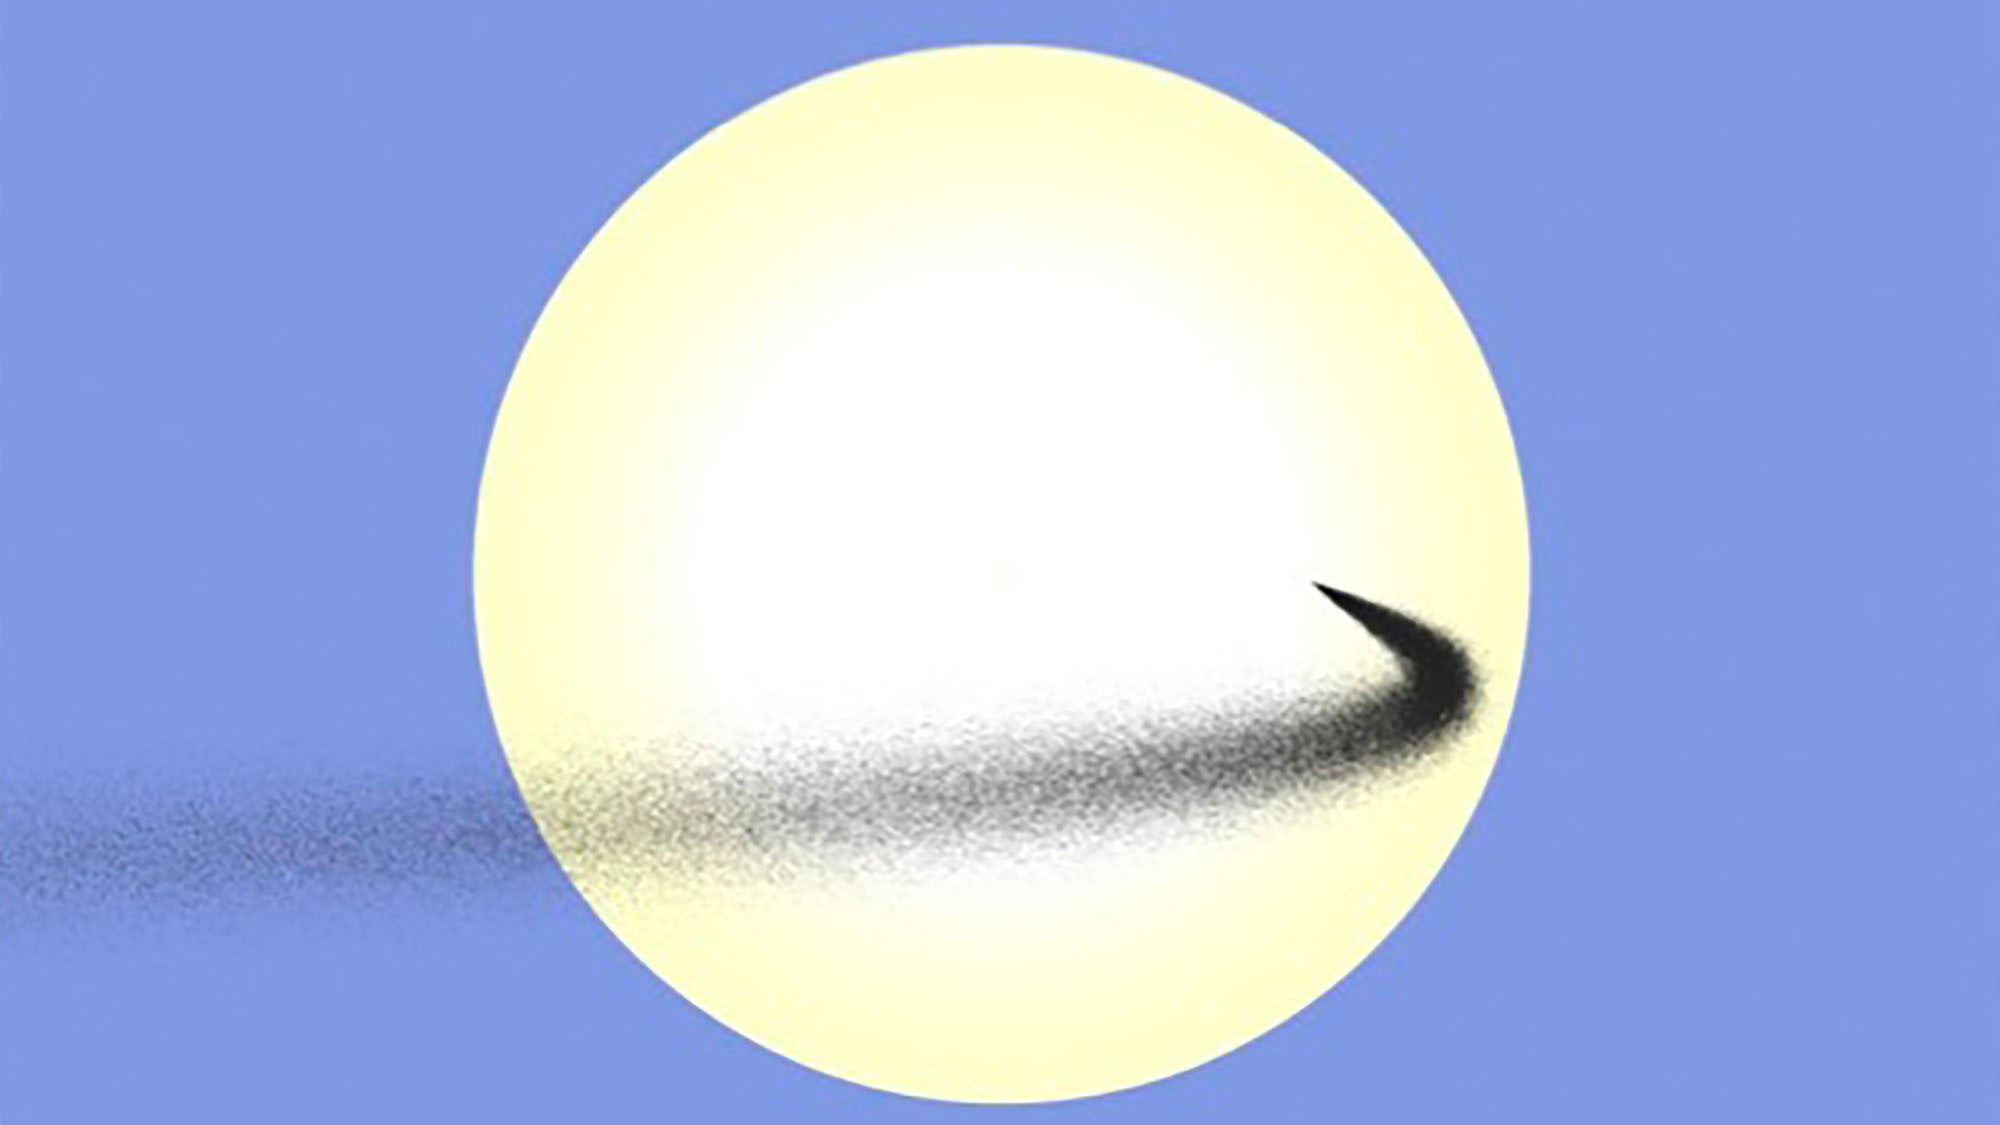 Simulated stream of dust launched between Earth and the Sun. This dust cloud is shown as it crosses the disk of the Sun, viewed from Earth. Streams like this one, including those launched from the Moon’s surface, can act as a temporary sunshade